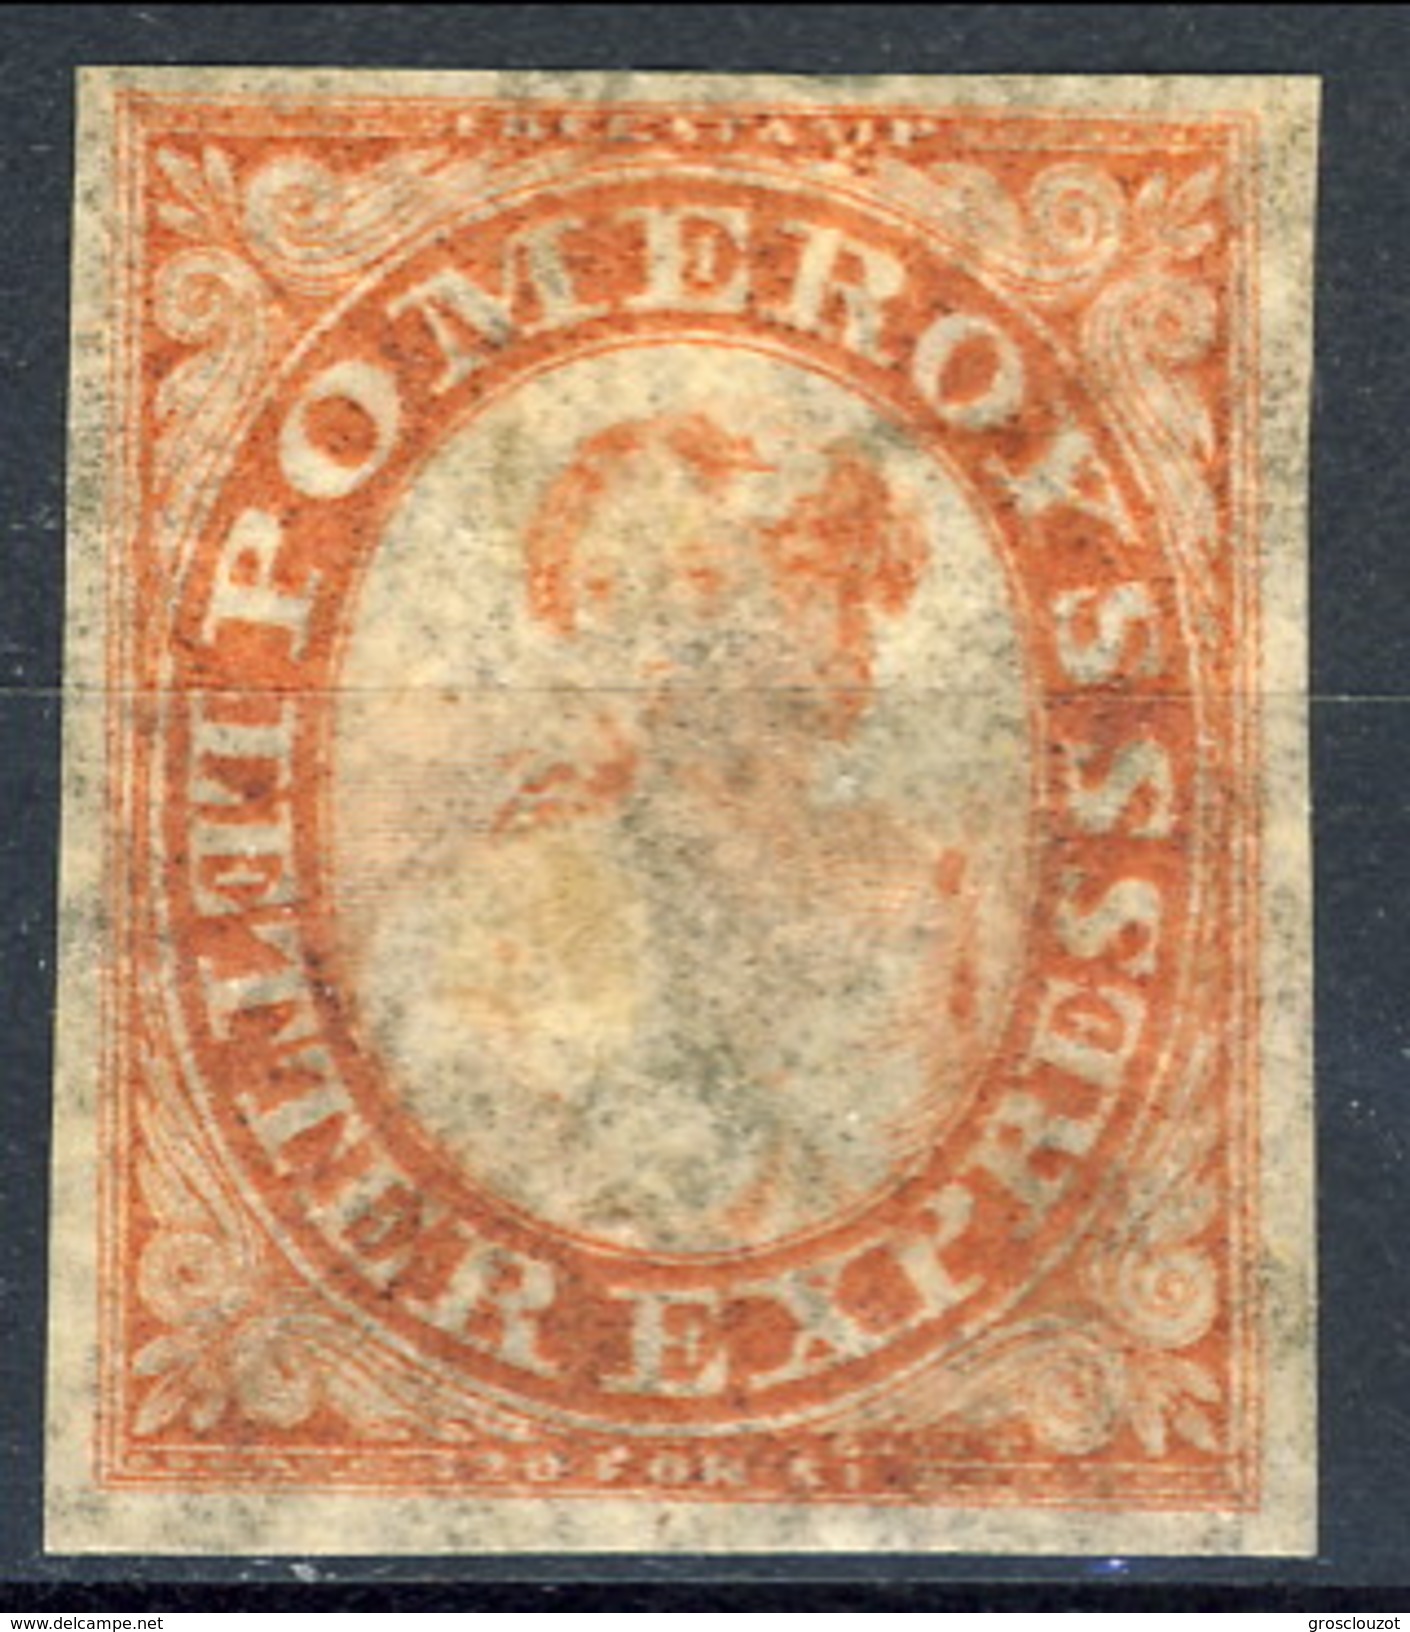 Mint 1844 US Local 117L5 Pomeroy's Red - Sellos Locales